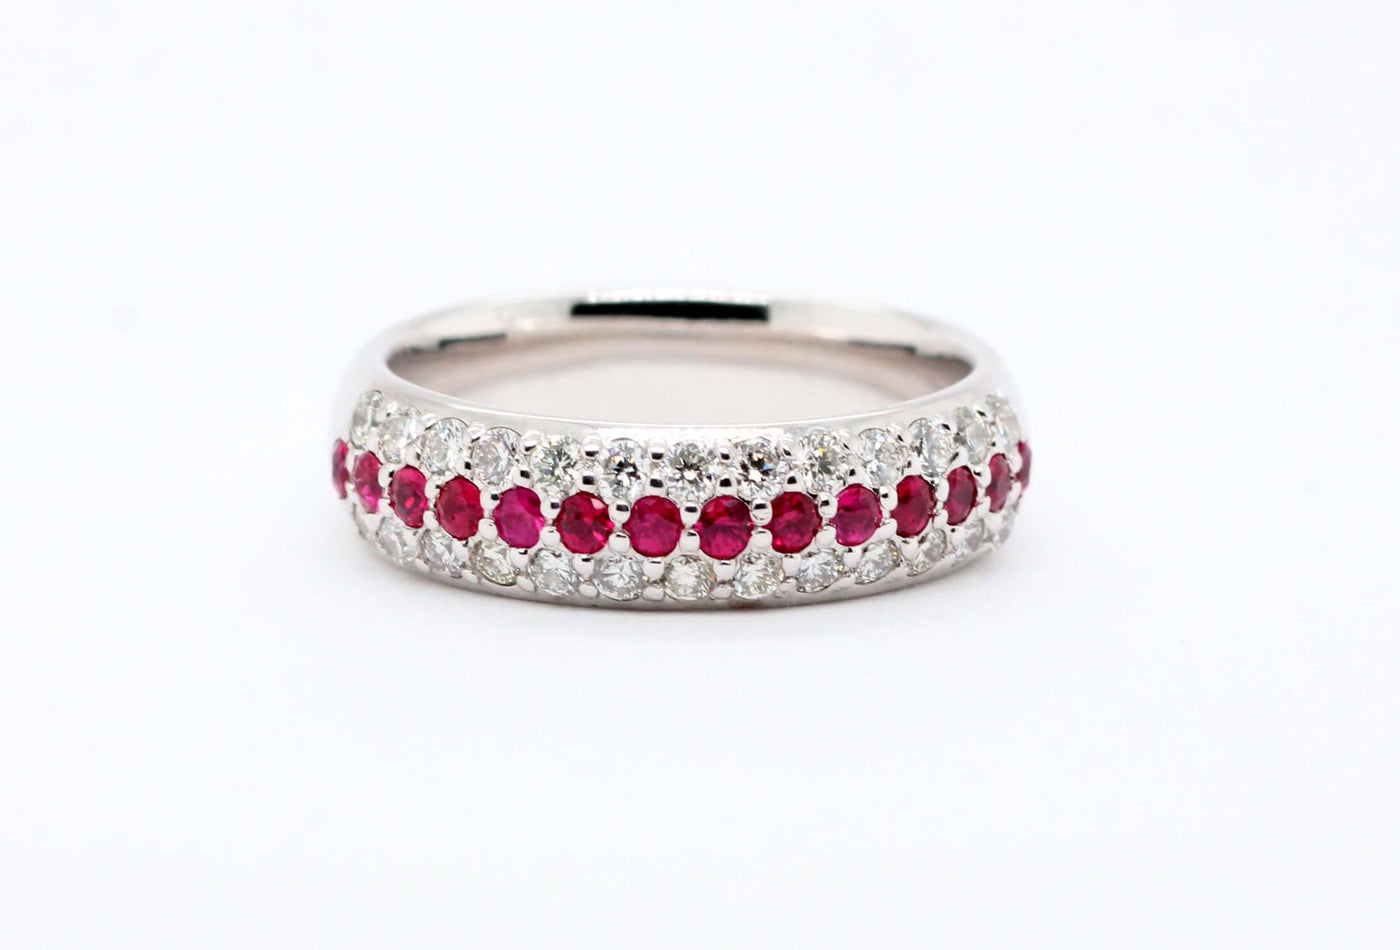 14kw .41 cttw ruby and diamond ring, .56 cttw h-si2 image